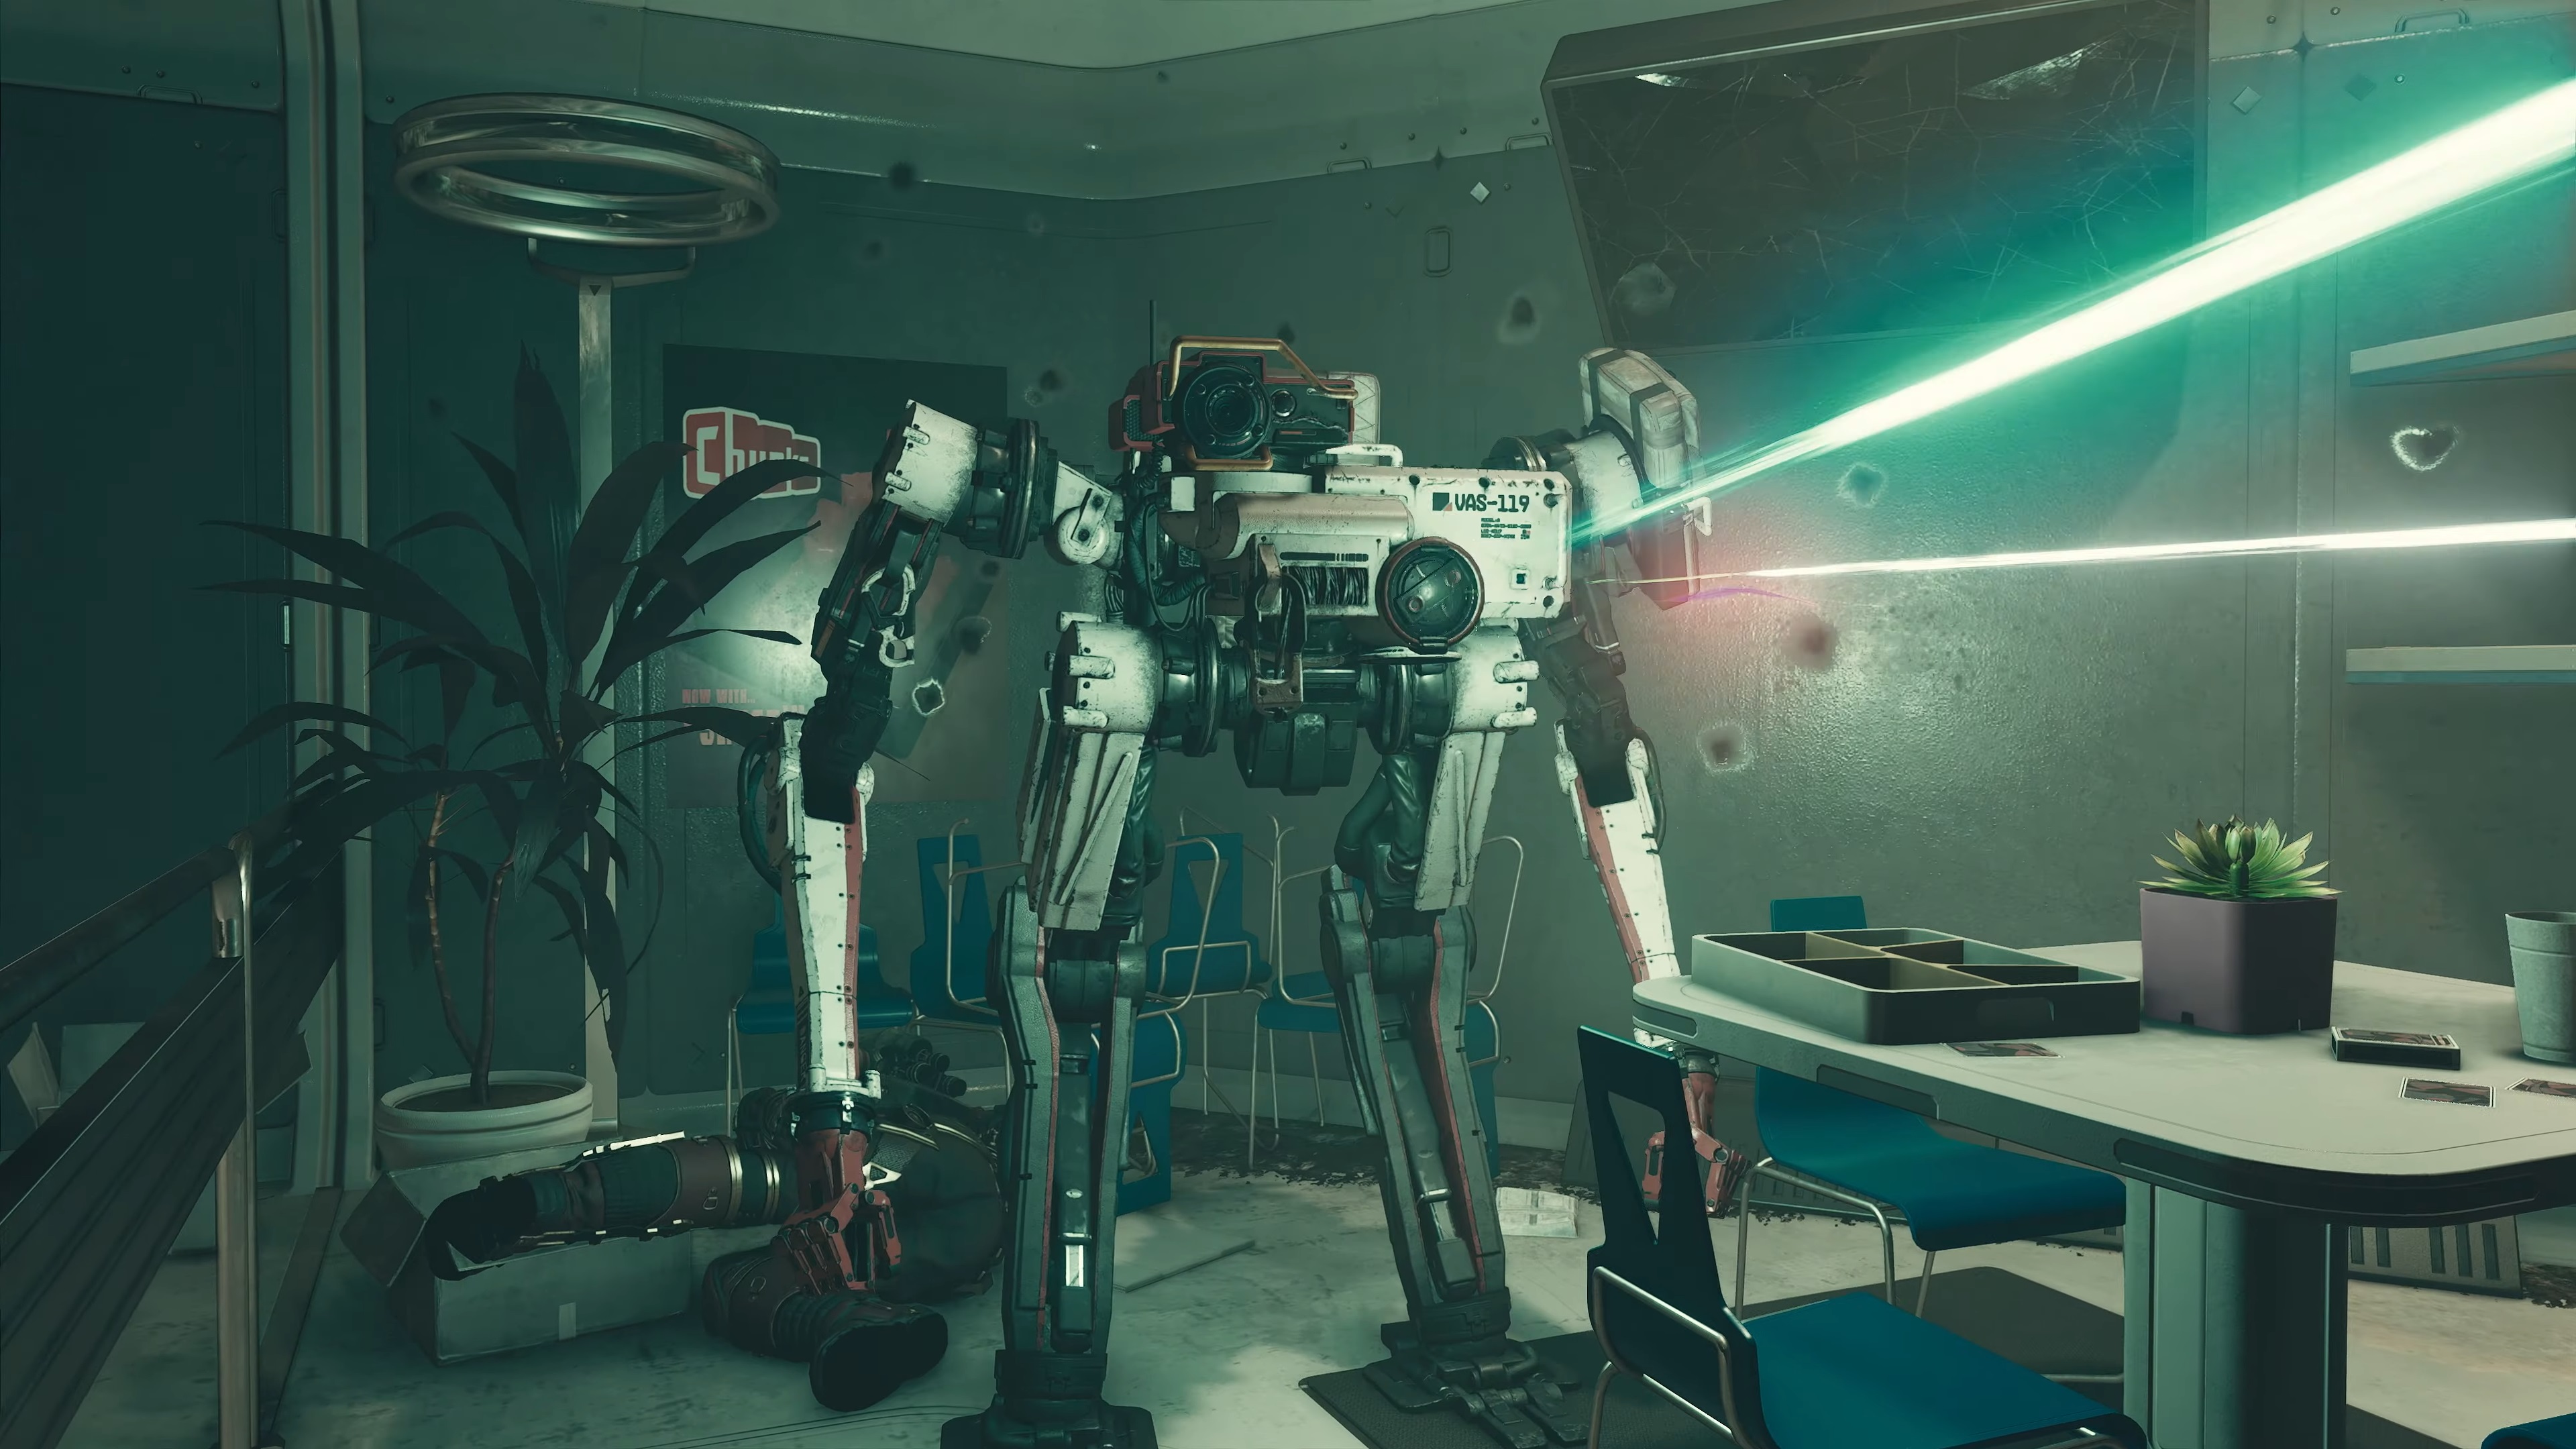 Starfield companions - a large bipedal robot shoots lasers from its chest